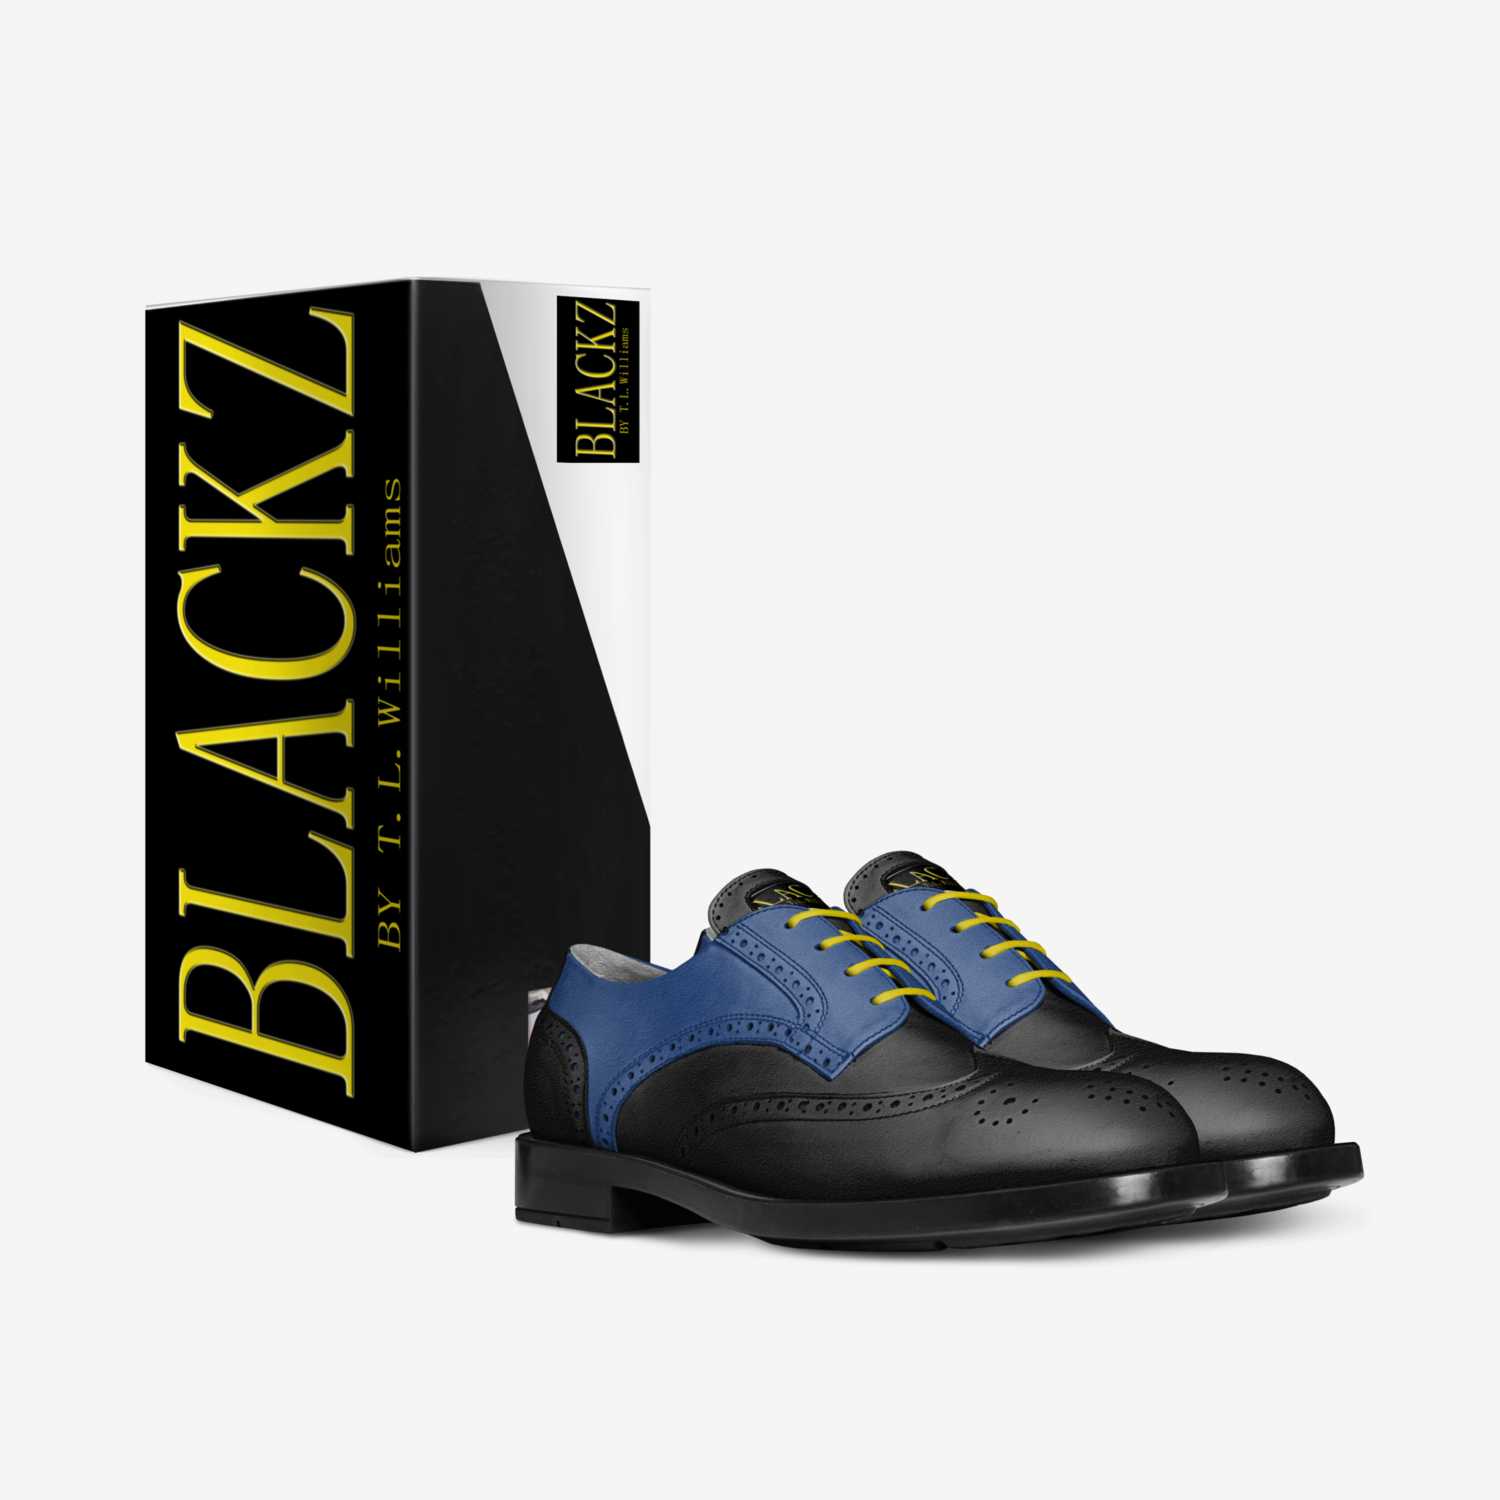 Blackz  custom made in Italy shoes by Terance Williams | Box view